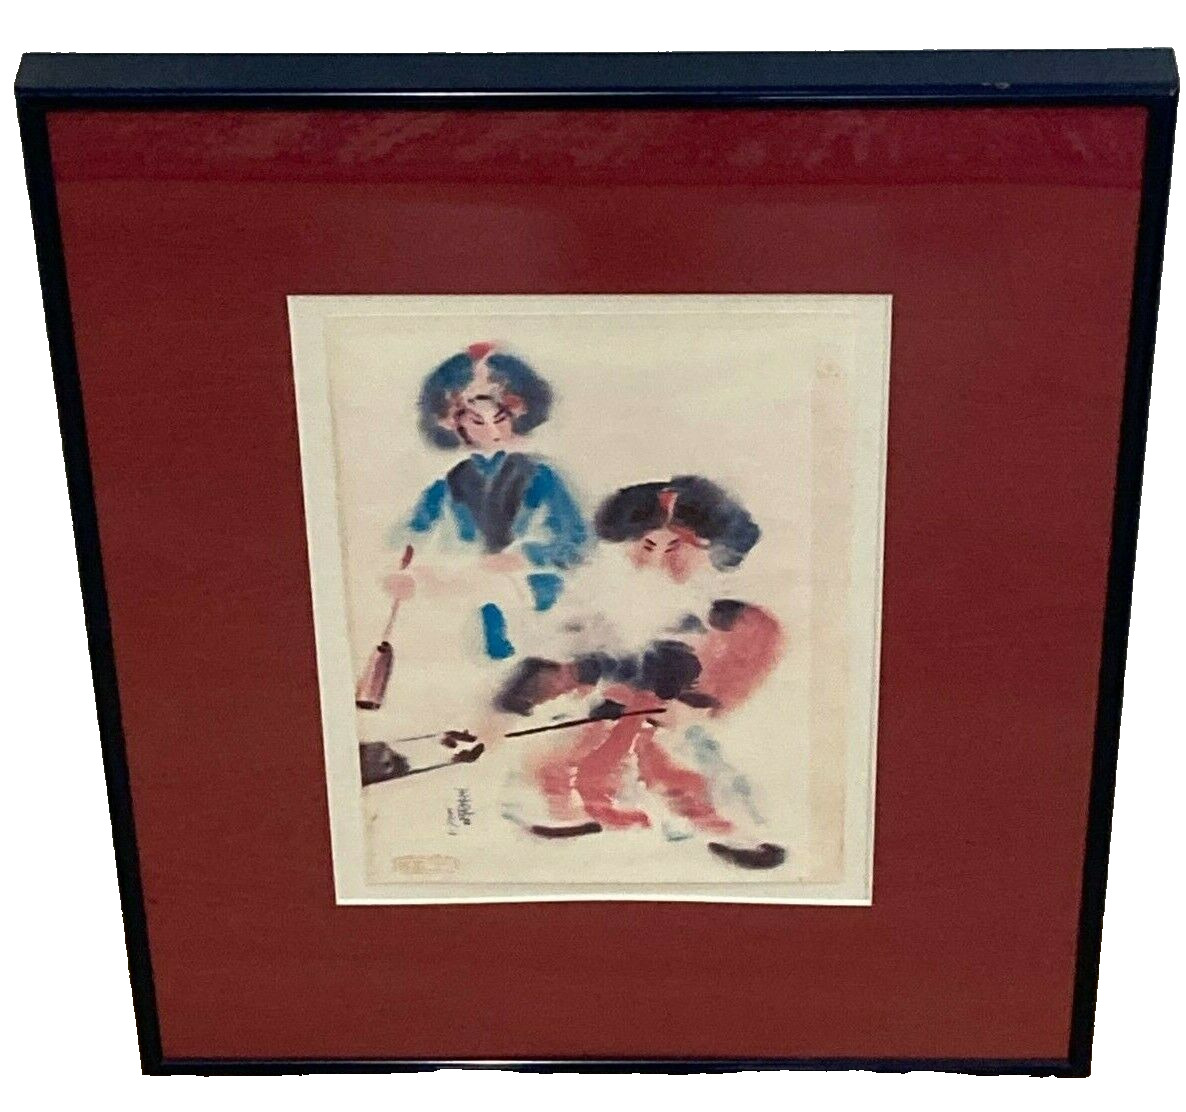 Interesting Image (Chinese Opera?). Signed, Framed, Matted. Paper. Water color? 